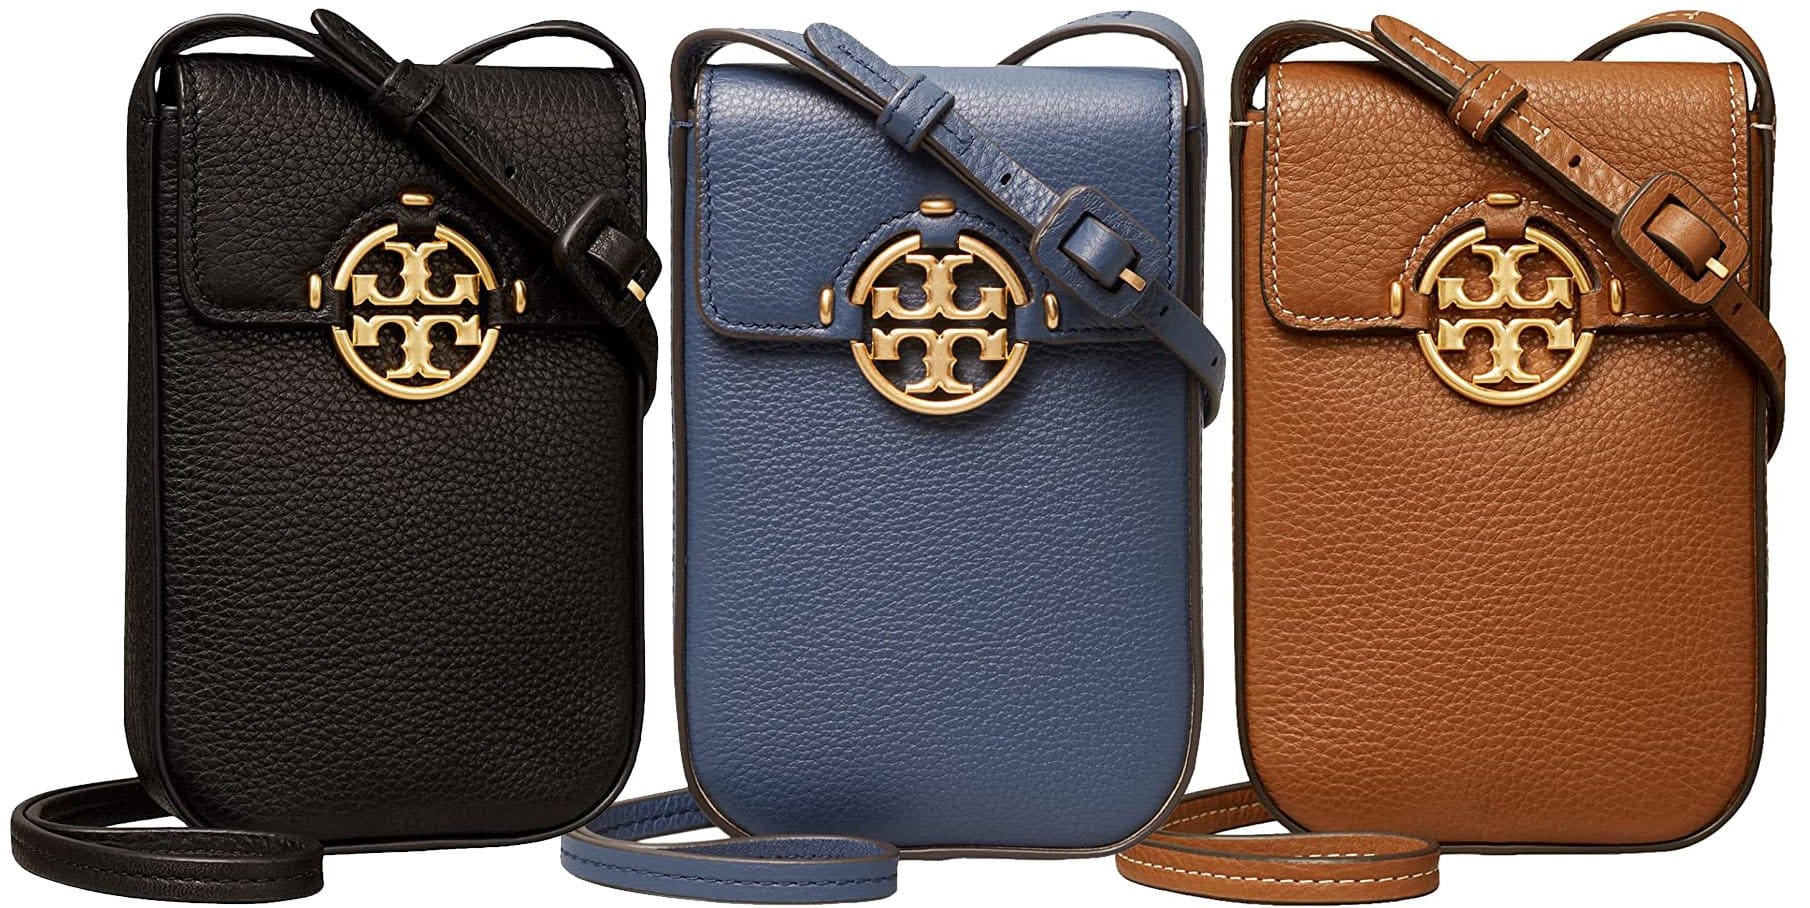 Tory Burch's Miller phone crossbody features a patchwork of smooth and snake-embossed leather with artisanal stitching and the fashion house's signature Double T